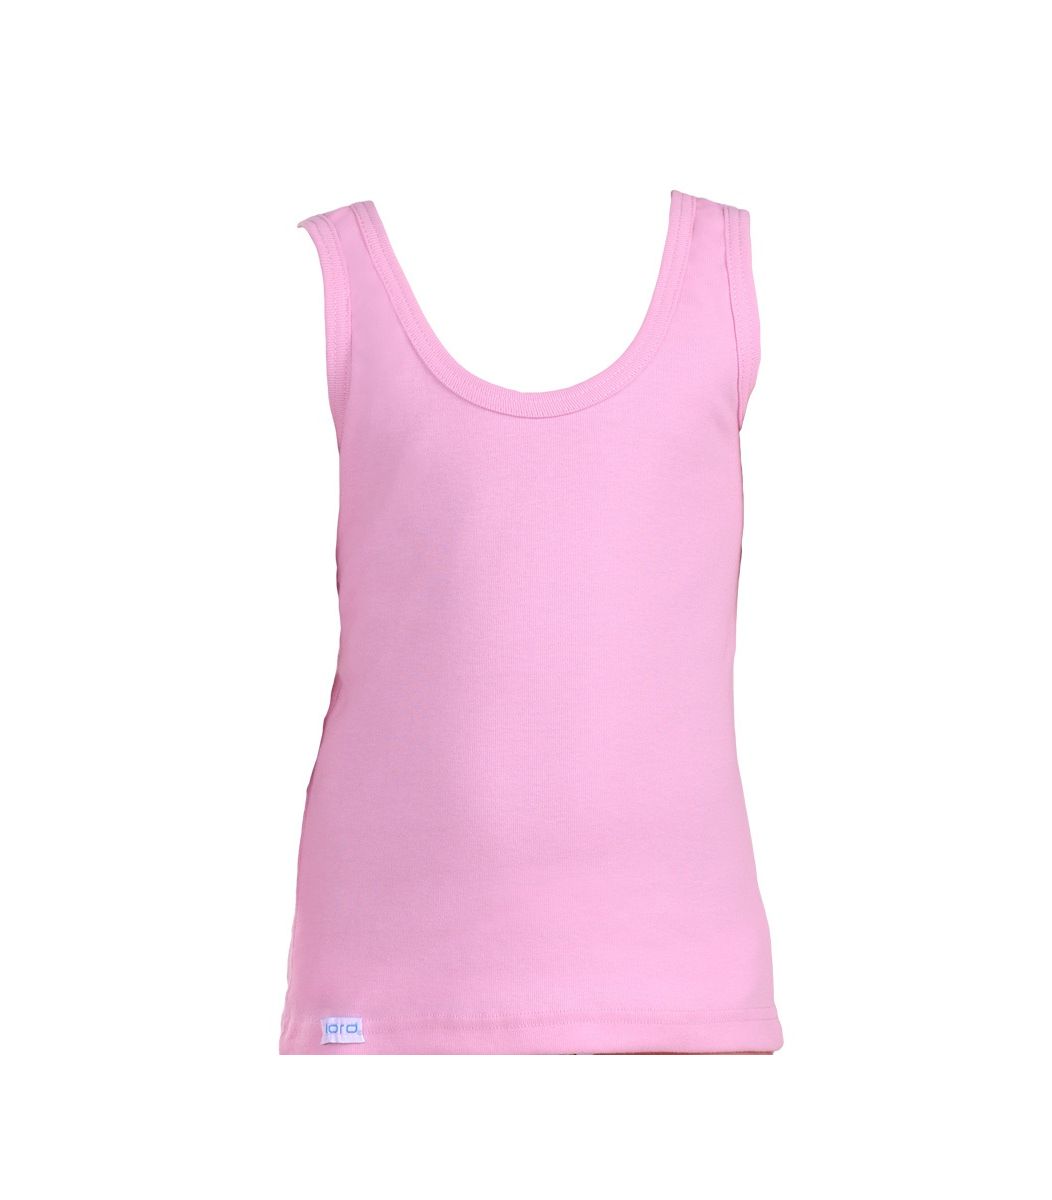 Camisole, pink